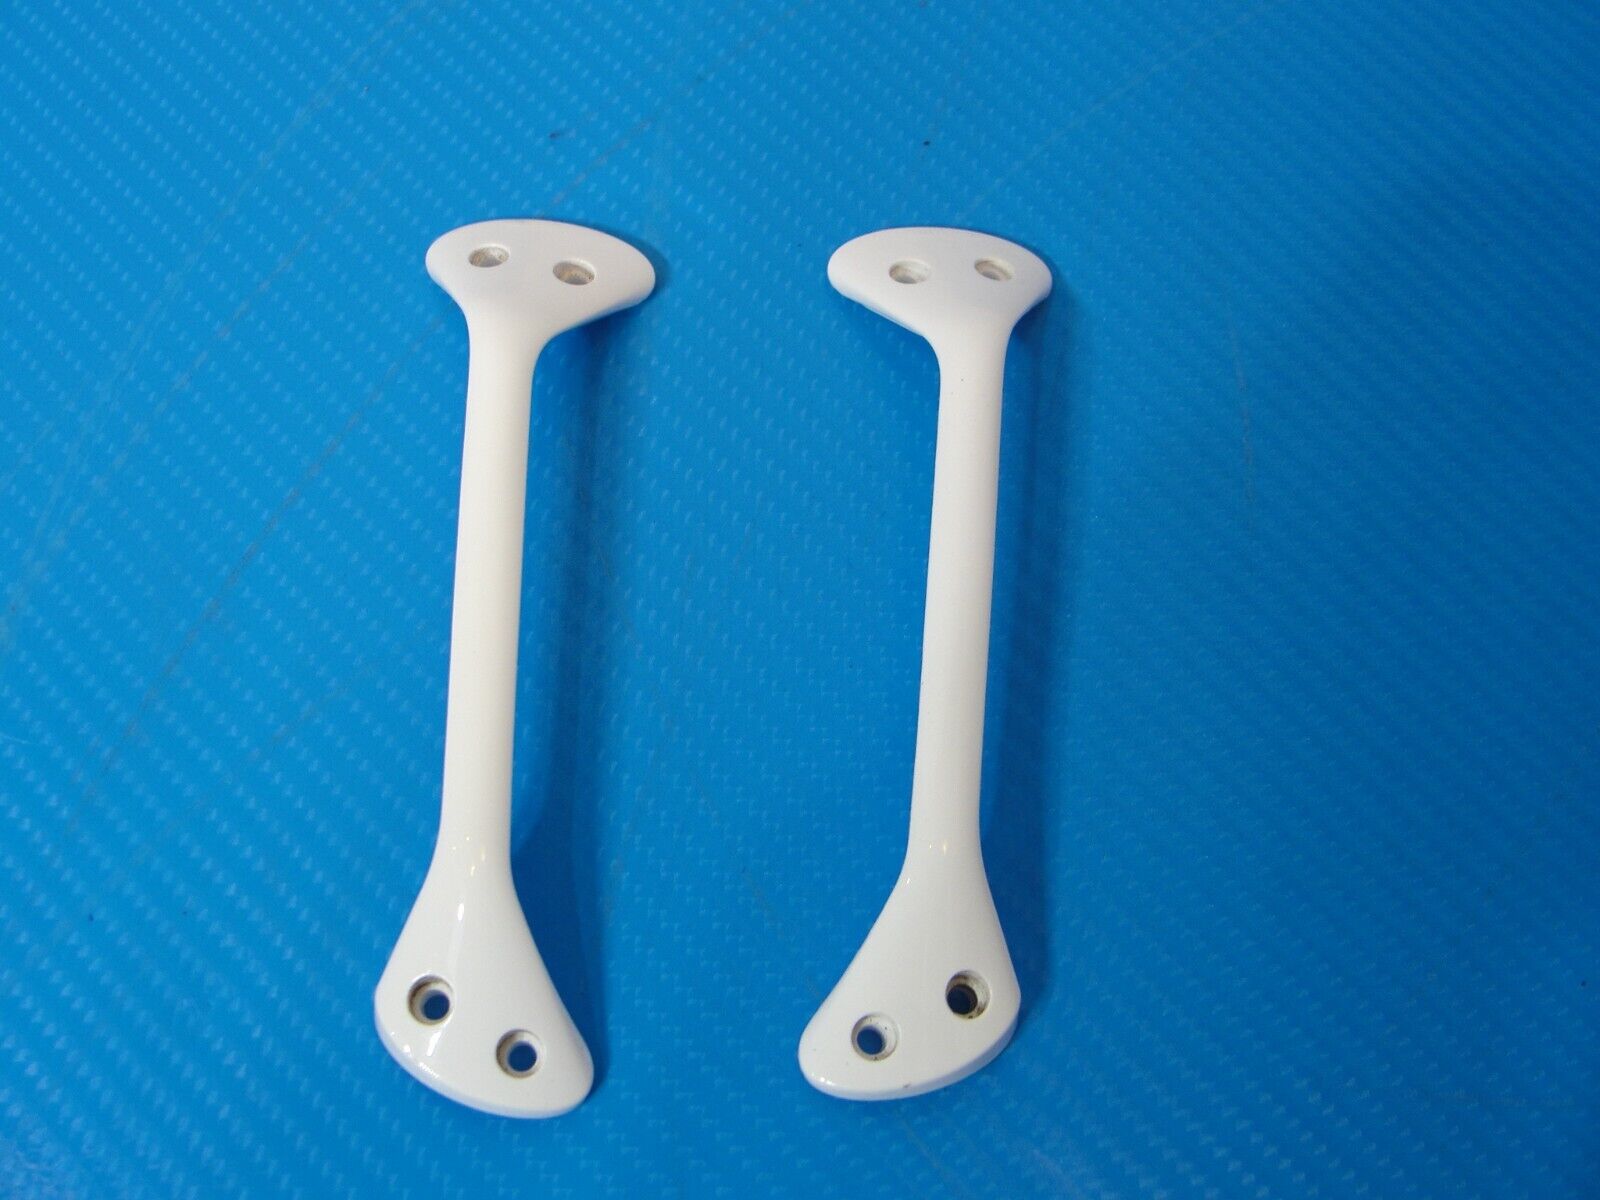 DJI Inspire 1 Drone Left and Right Side Bracket Cover Support White